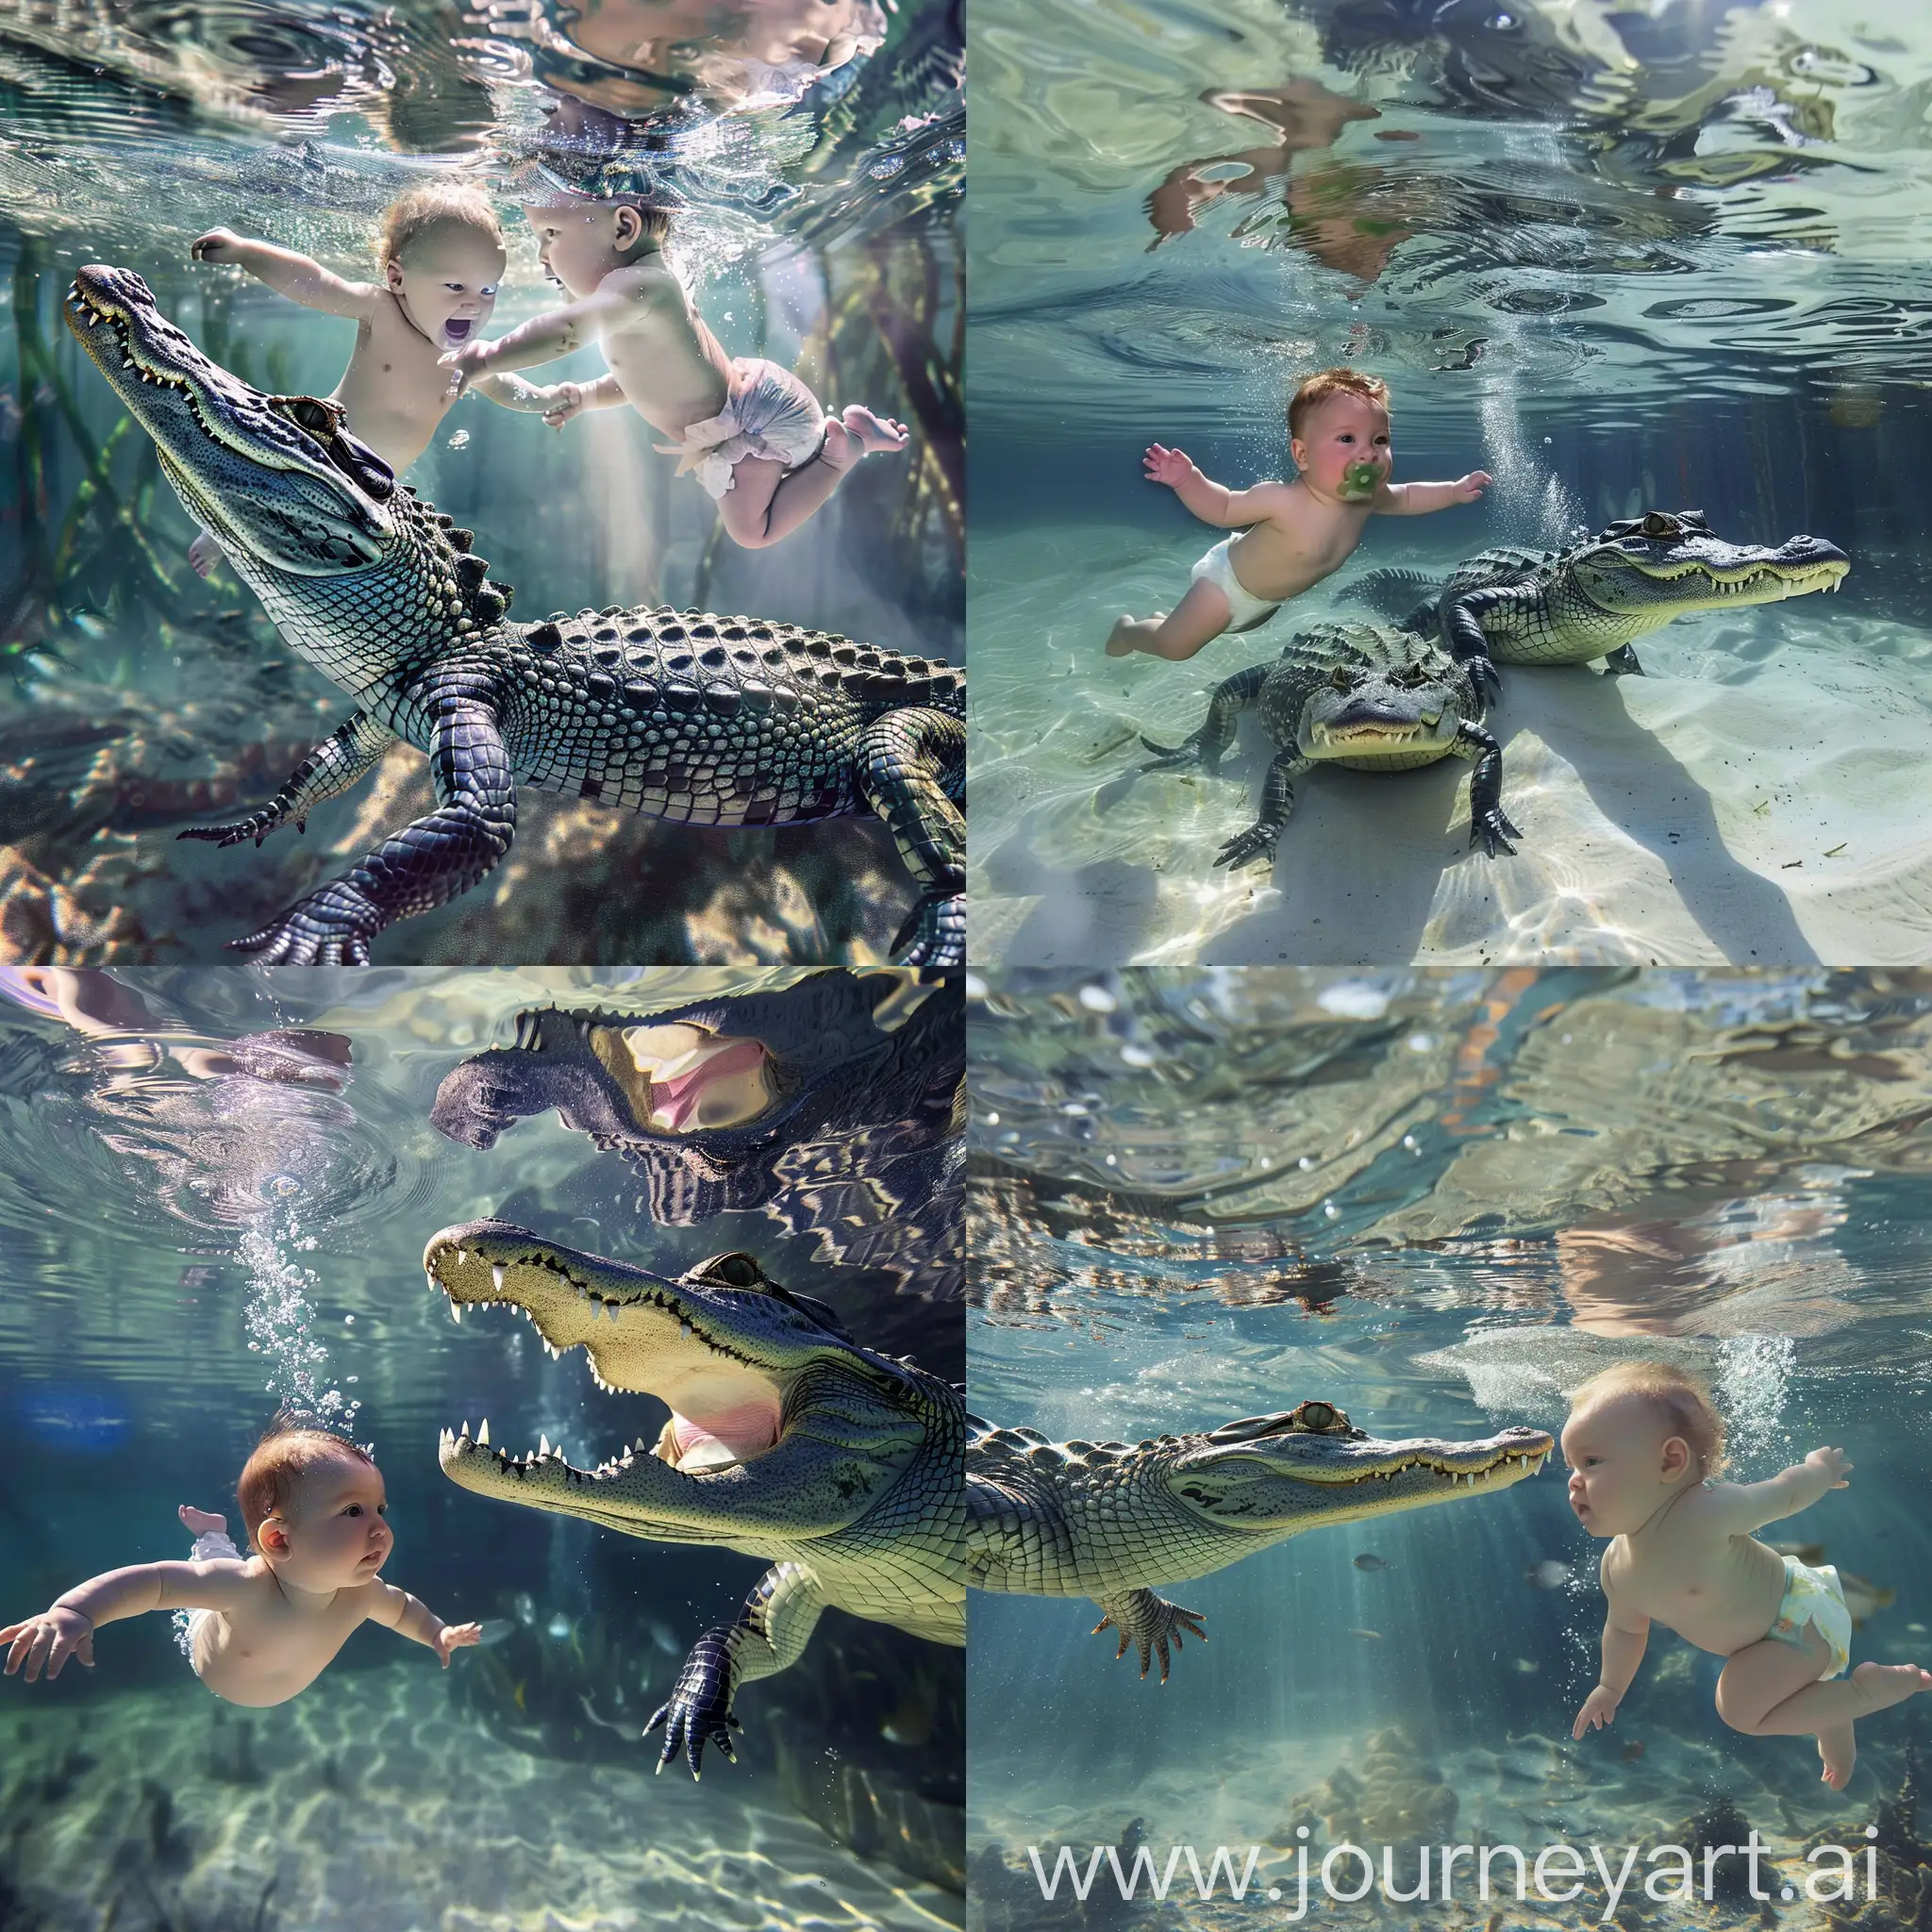 A human baby swims underwater with an alligator --v 6